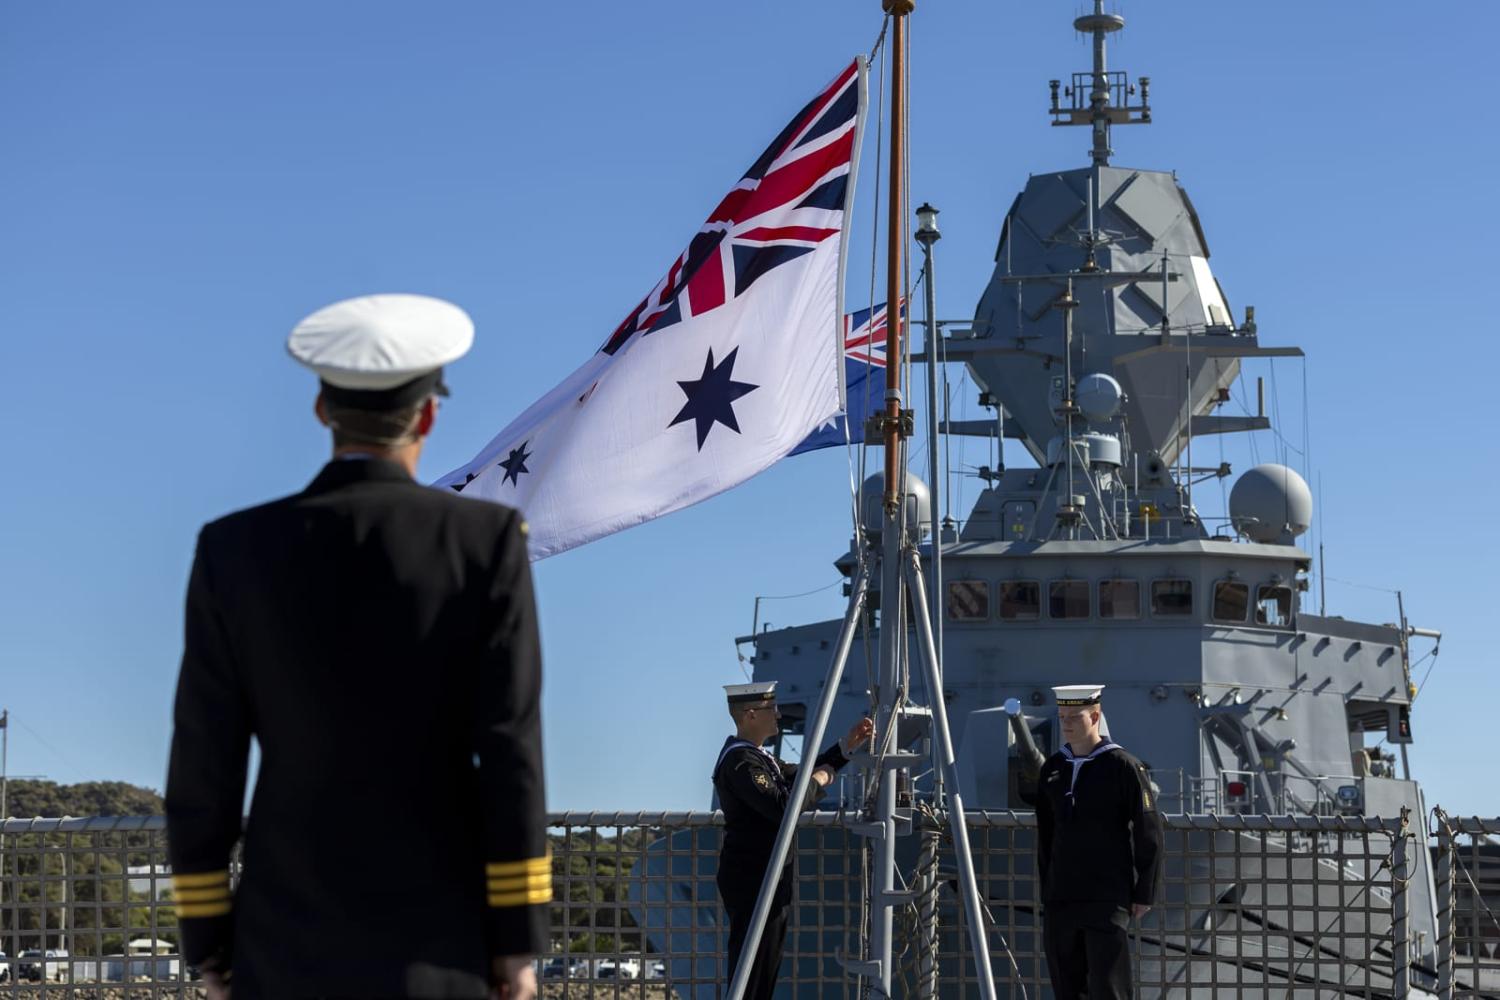 Lowering the Australian white ensign for the last time on HMAS Anzac during the decommissioning ceremony held at HMAS Stirling, Western Australia (Ernesto Sanchez/Defence Department)